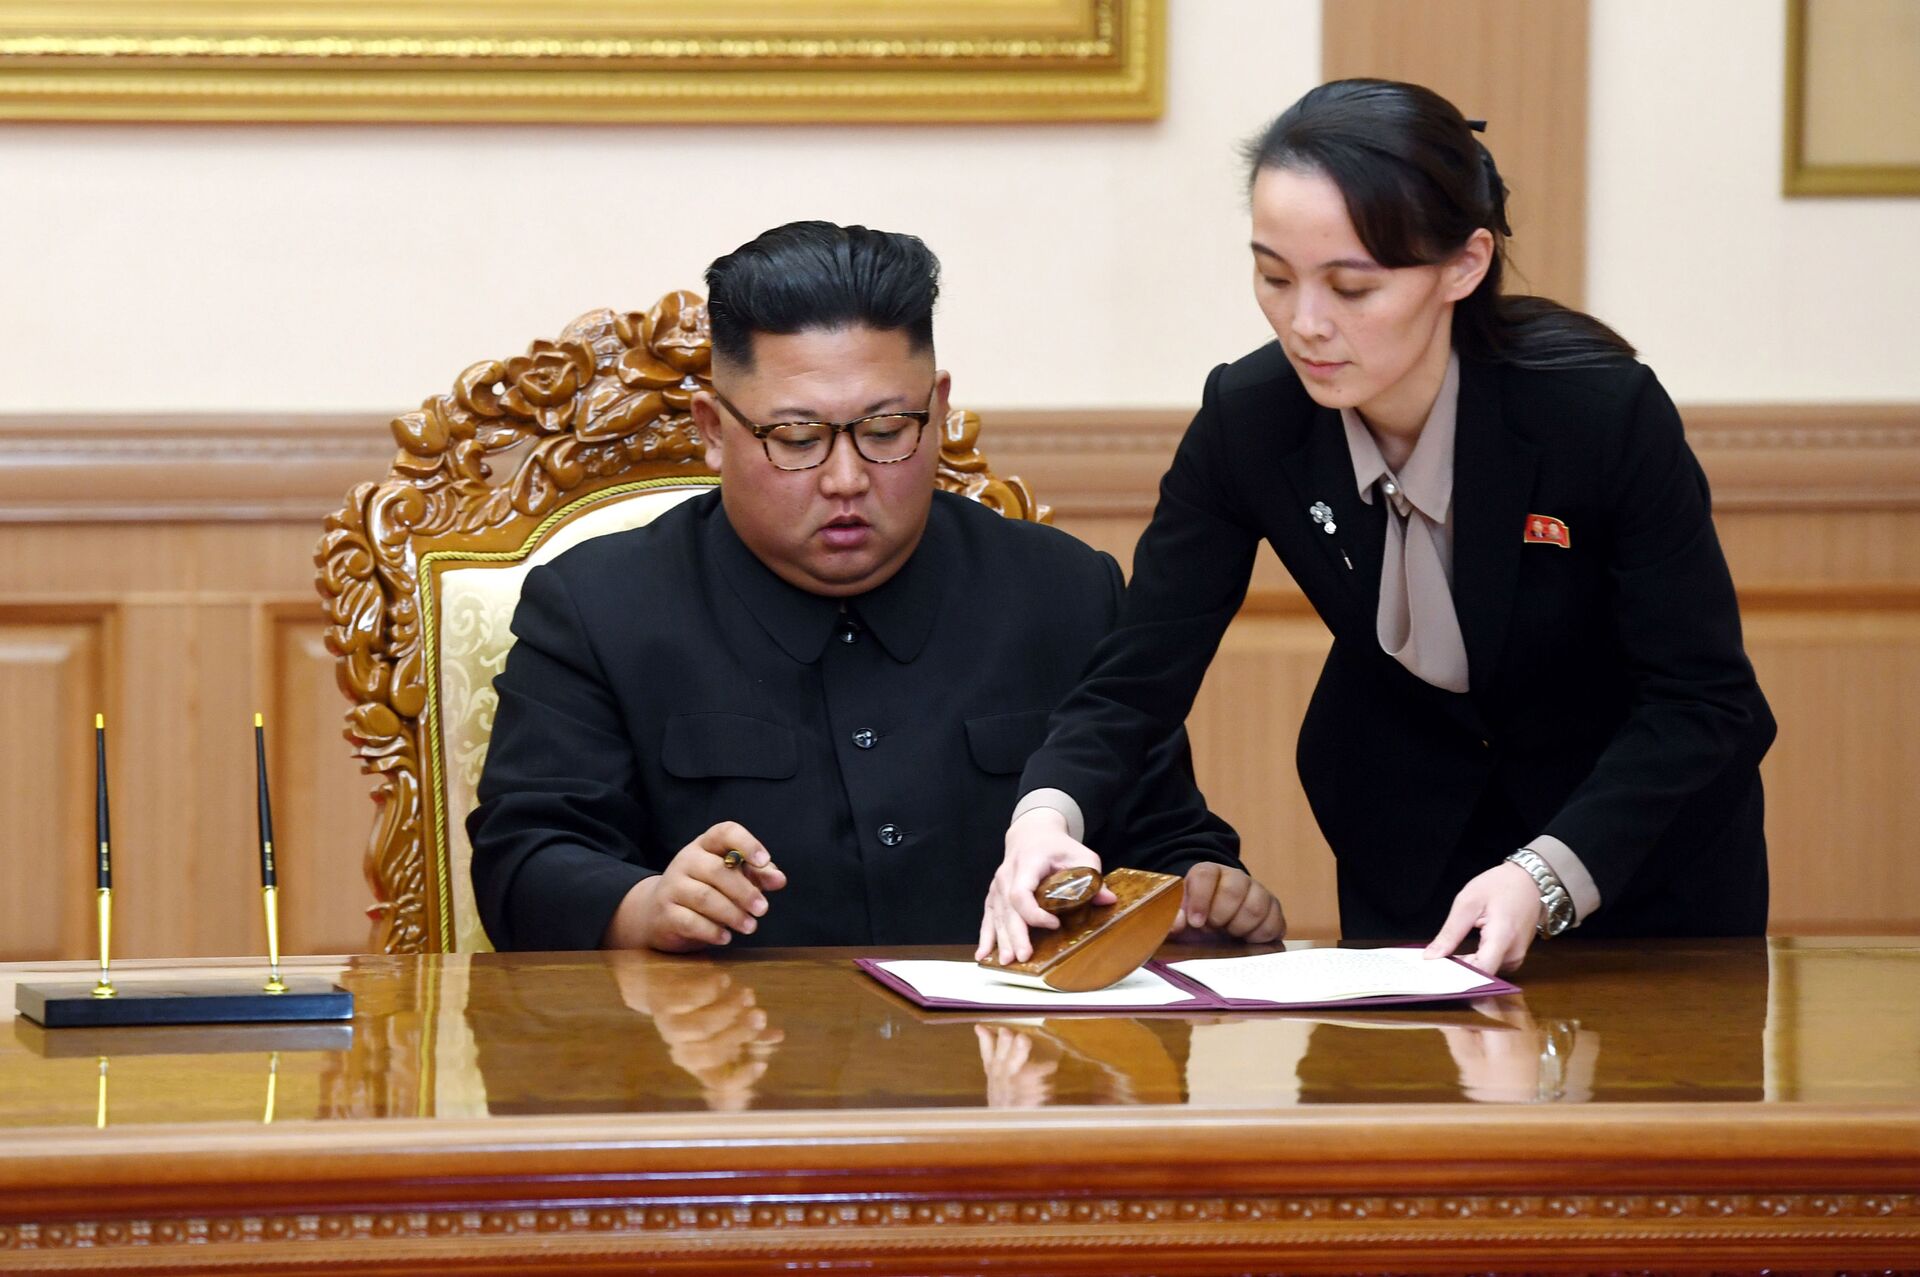 In this Sept. 19, 2018, file photo, Kim Yo Jong, right, sister of North Korean leader Kim Jong Un, helps Kim sign joint statement following the summit with South Korean President Moon Jae-in at the Paekhwawon State Guesthouse in Pyongyang, North Korea. Kim's prolonged public absence has led to rumors of ill health and worries about how it could influence the future of what one analyst calls Northeast Asia's Achilles' heel, a reference to the North's belligerence and unpredictable nature. - Sputnik International, 1920, 23.08.2022